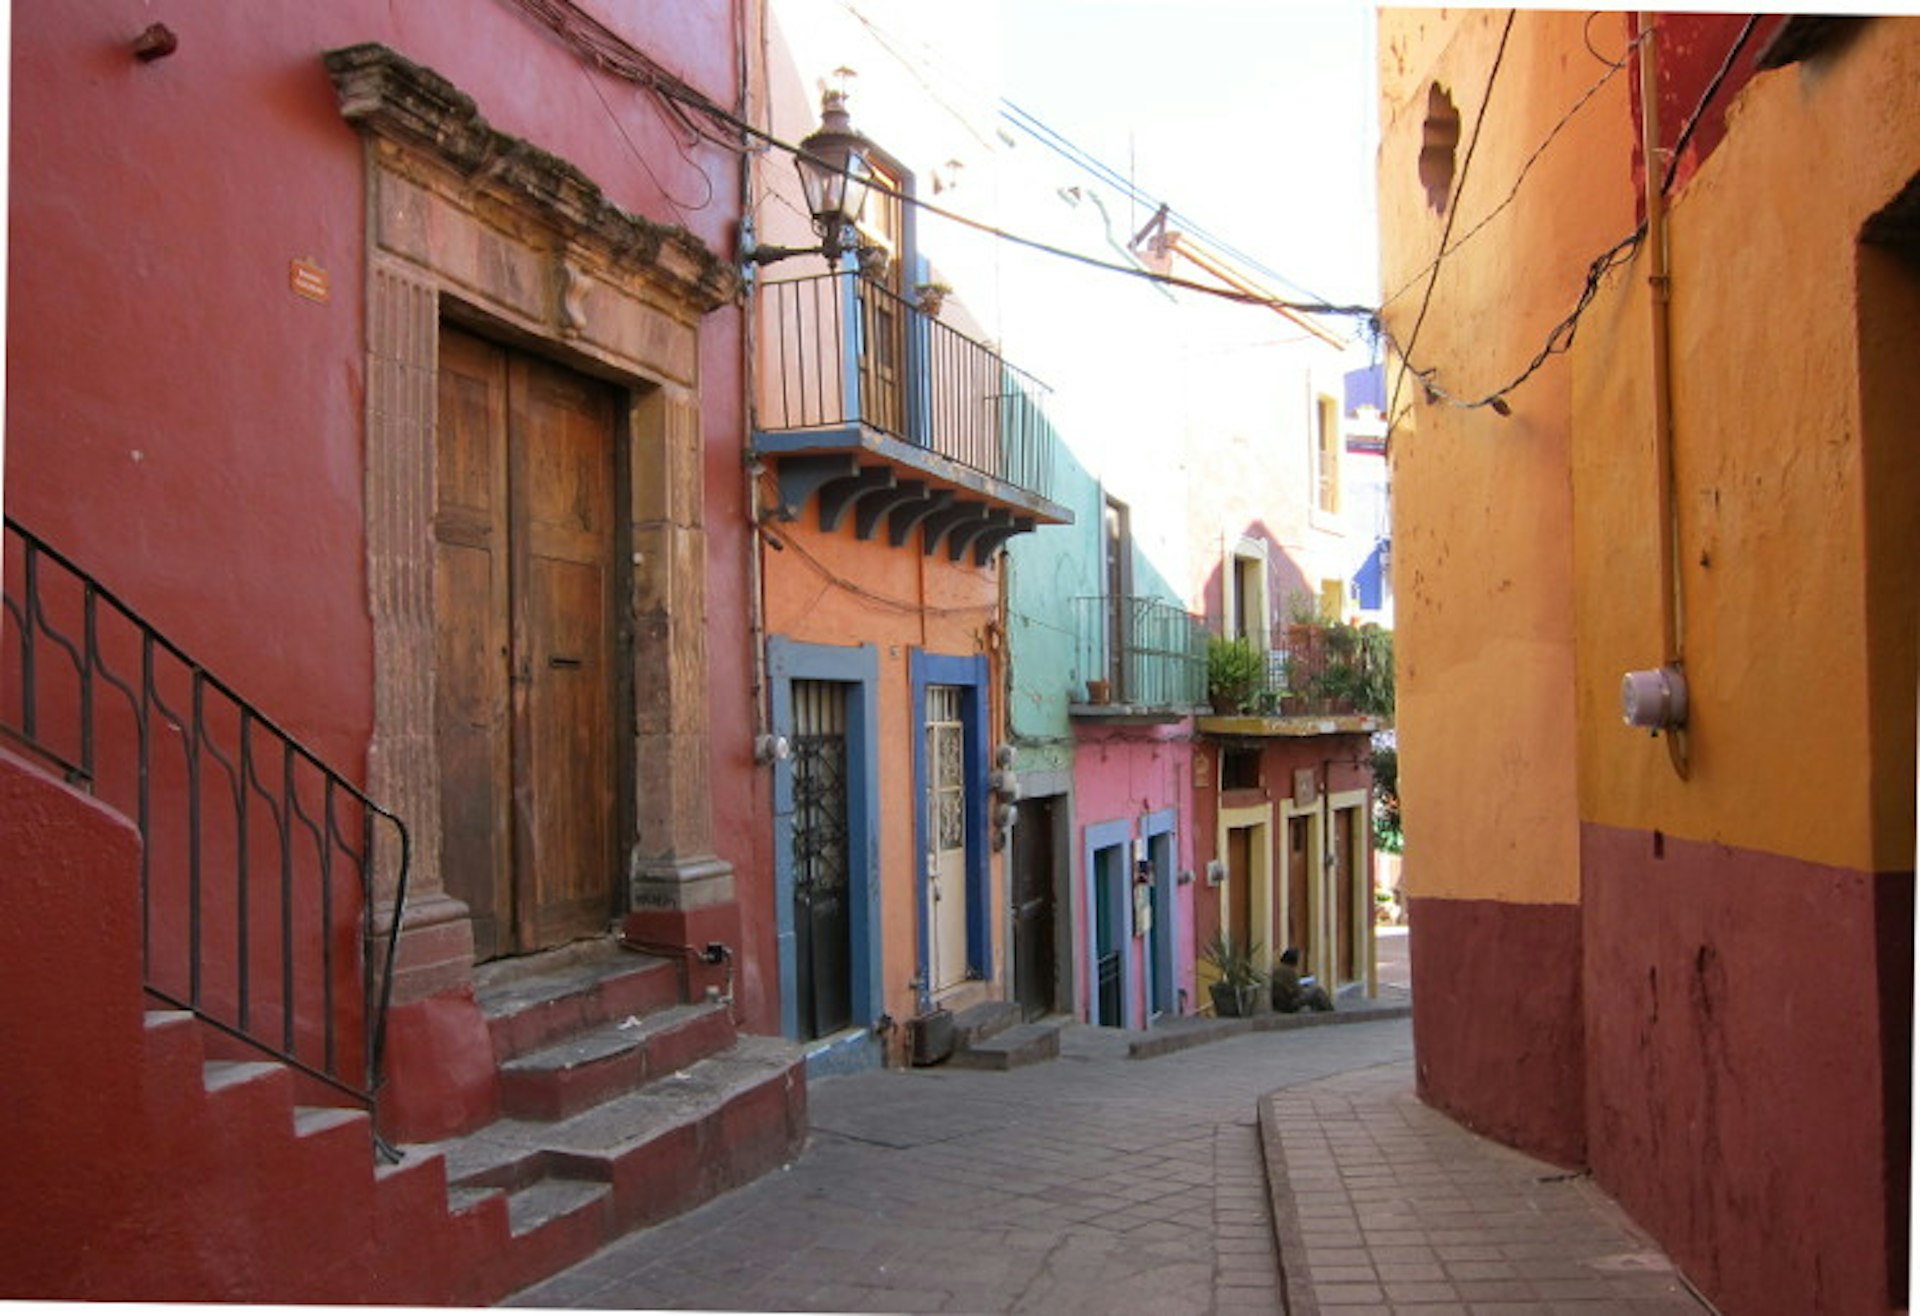 Multicolored houses line the streets of Guanajuato. Image by Kate Armstrong Lonely Planet